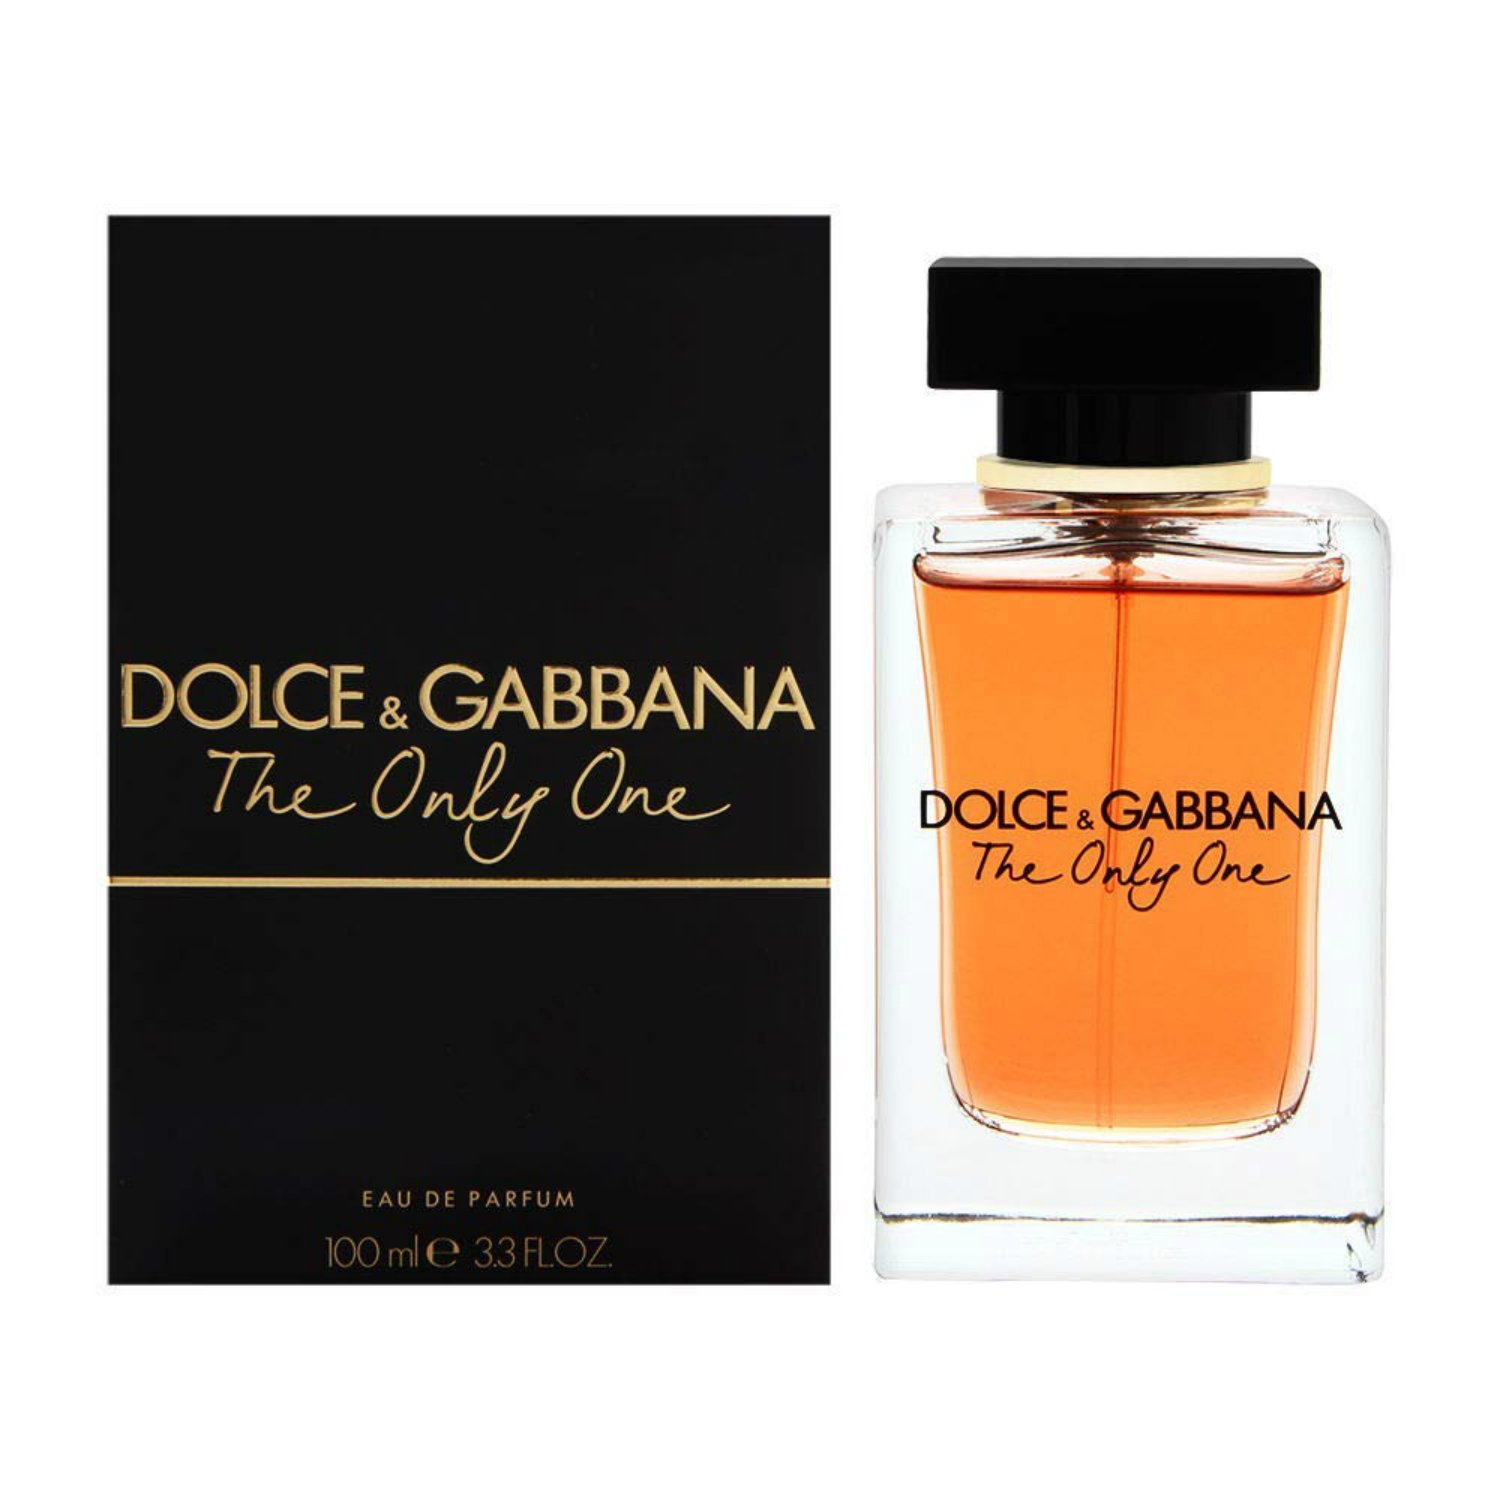 Духи dolce only one. Dolce Gabbana the only one 100ml. Dolce & Gabbana the only one 100 мл. Dolce & Gabbana the only one, EDP., 100 ml. Духи Dolce Gabbana the only one женские.